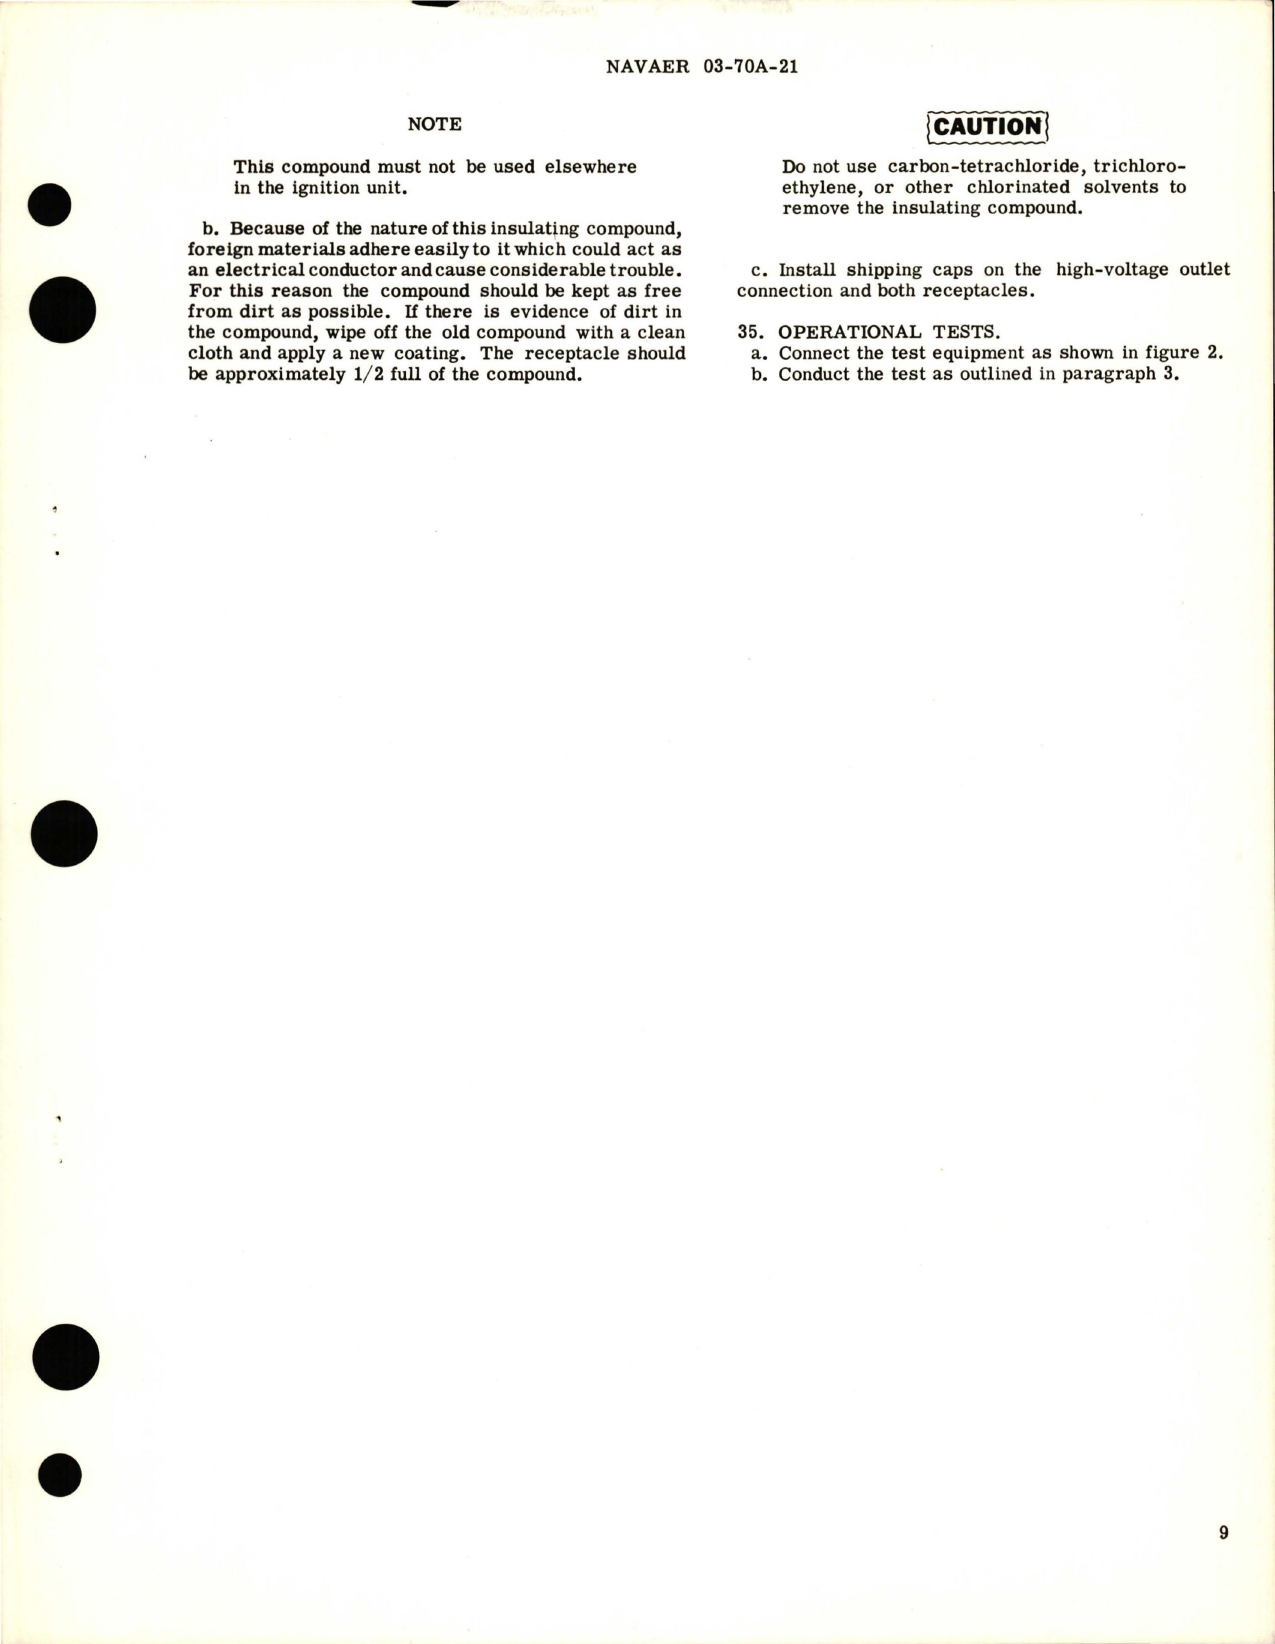 Sample page 9 from AirCorps Library document: Overhaul Instructions with Parts Breakdown for Ignition Unit - Part B11C30 